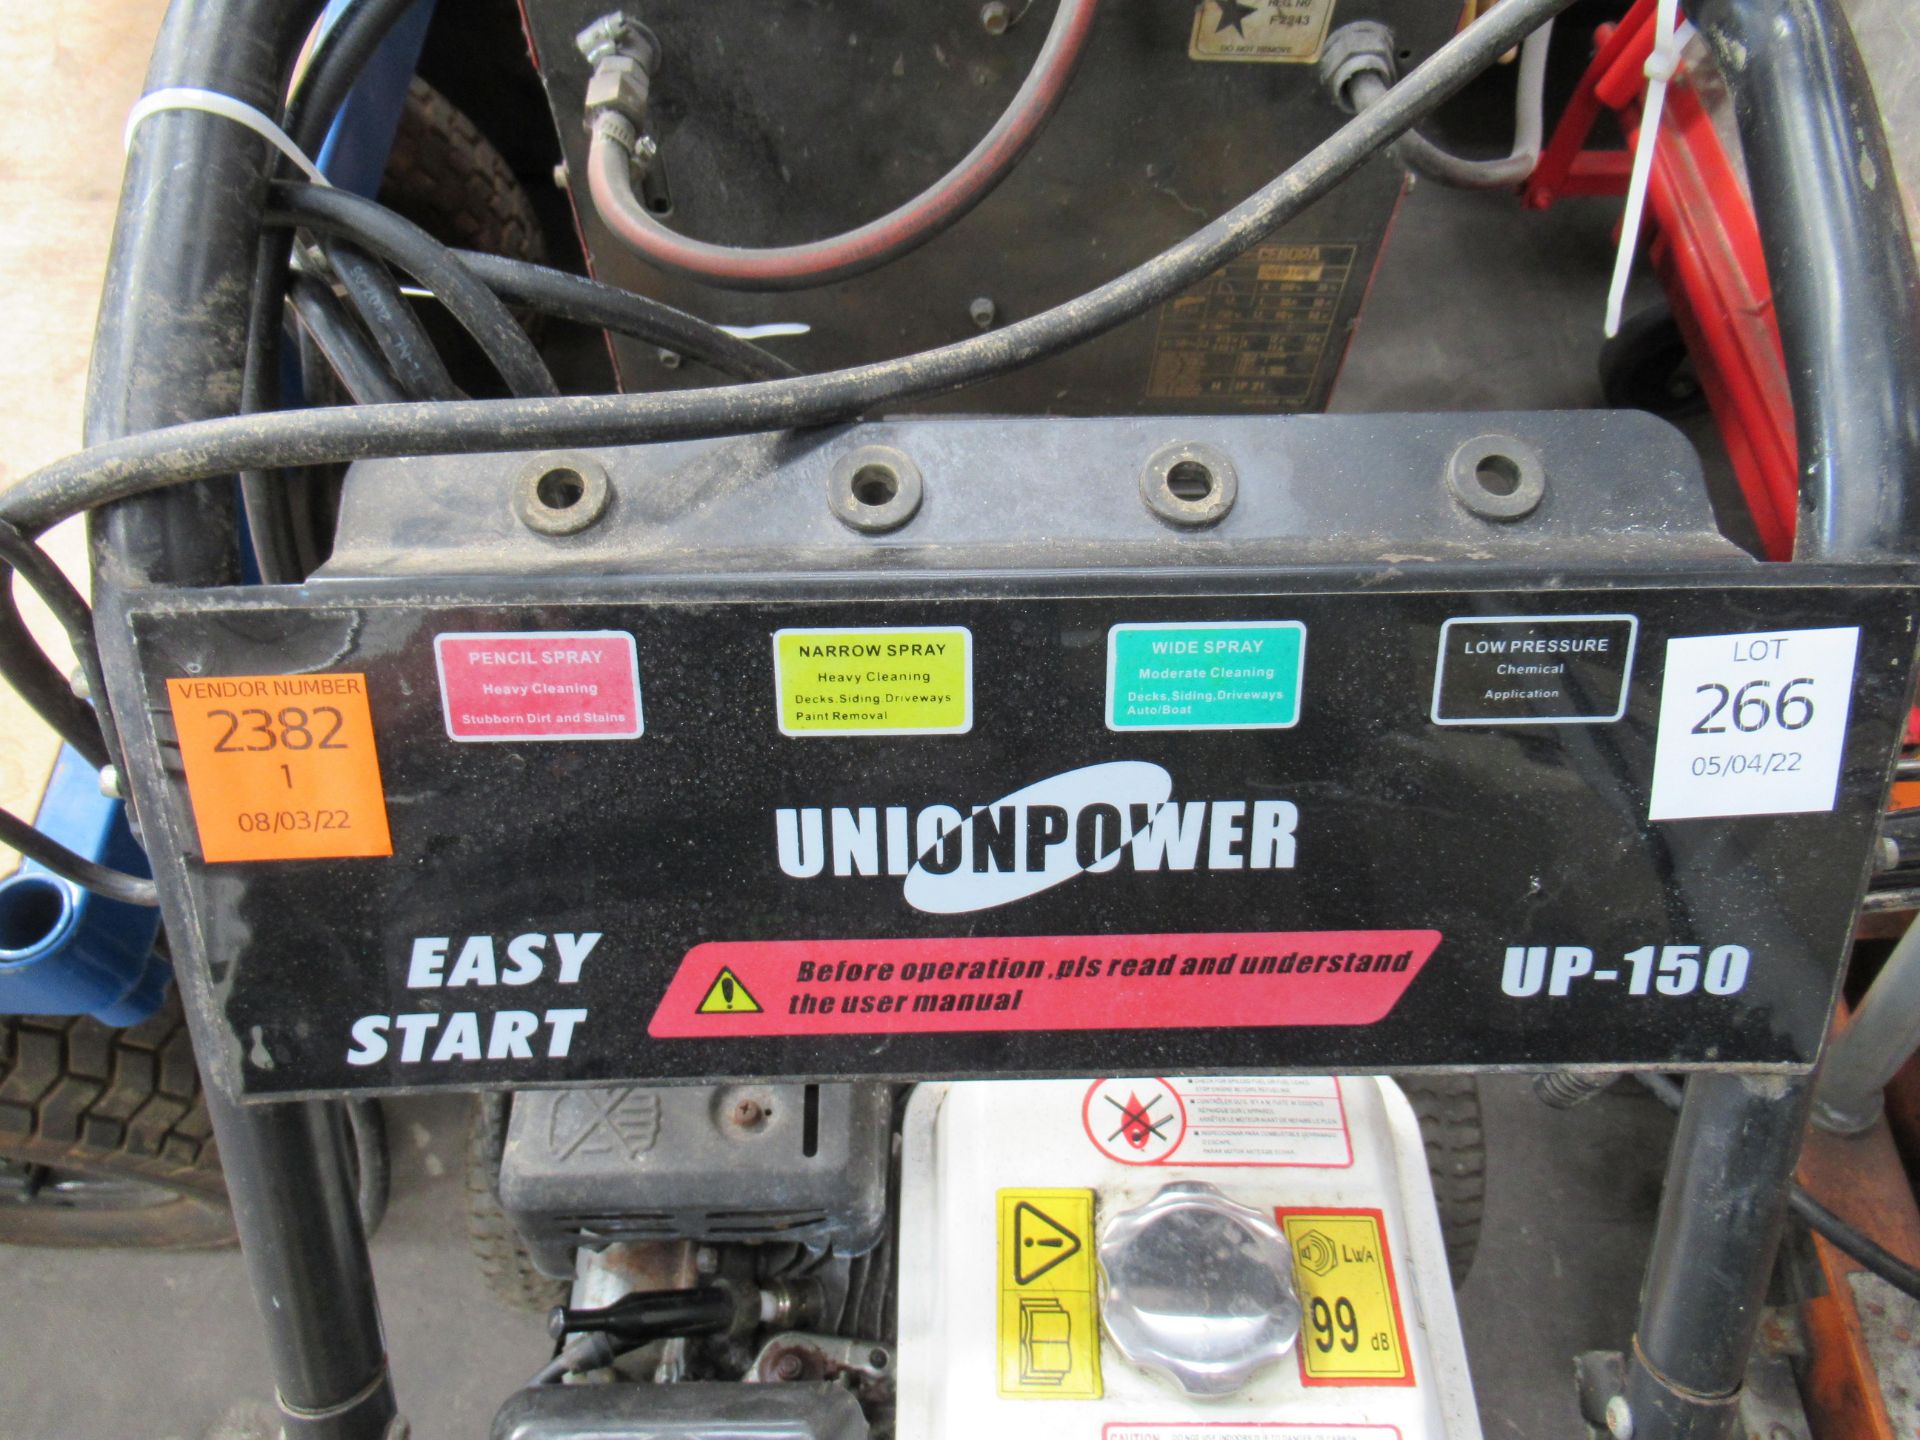 Union power UP-150 petrol powered pressure washer - Image 3 of 3